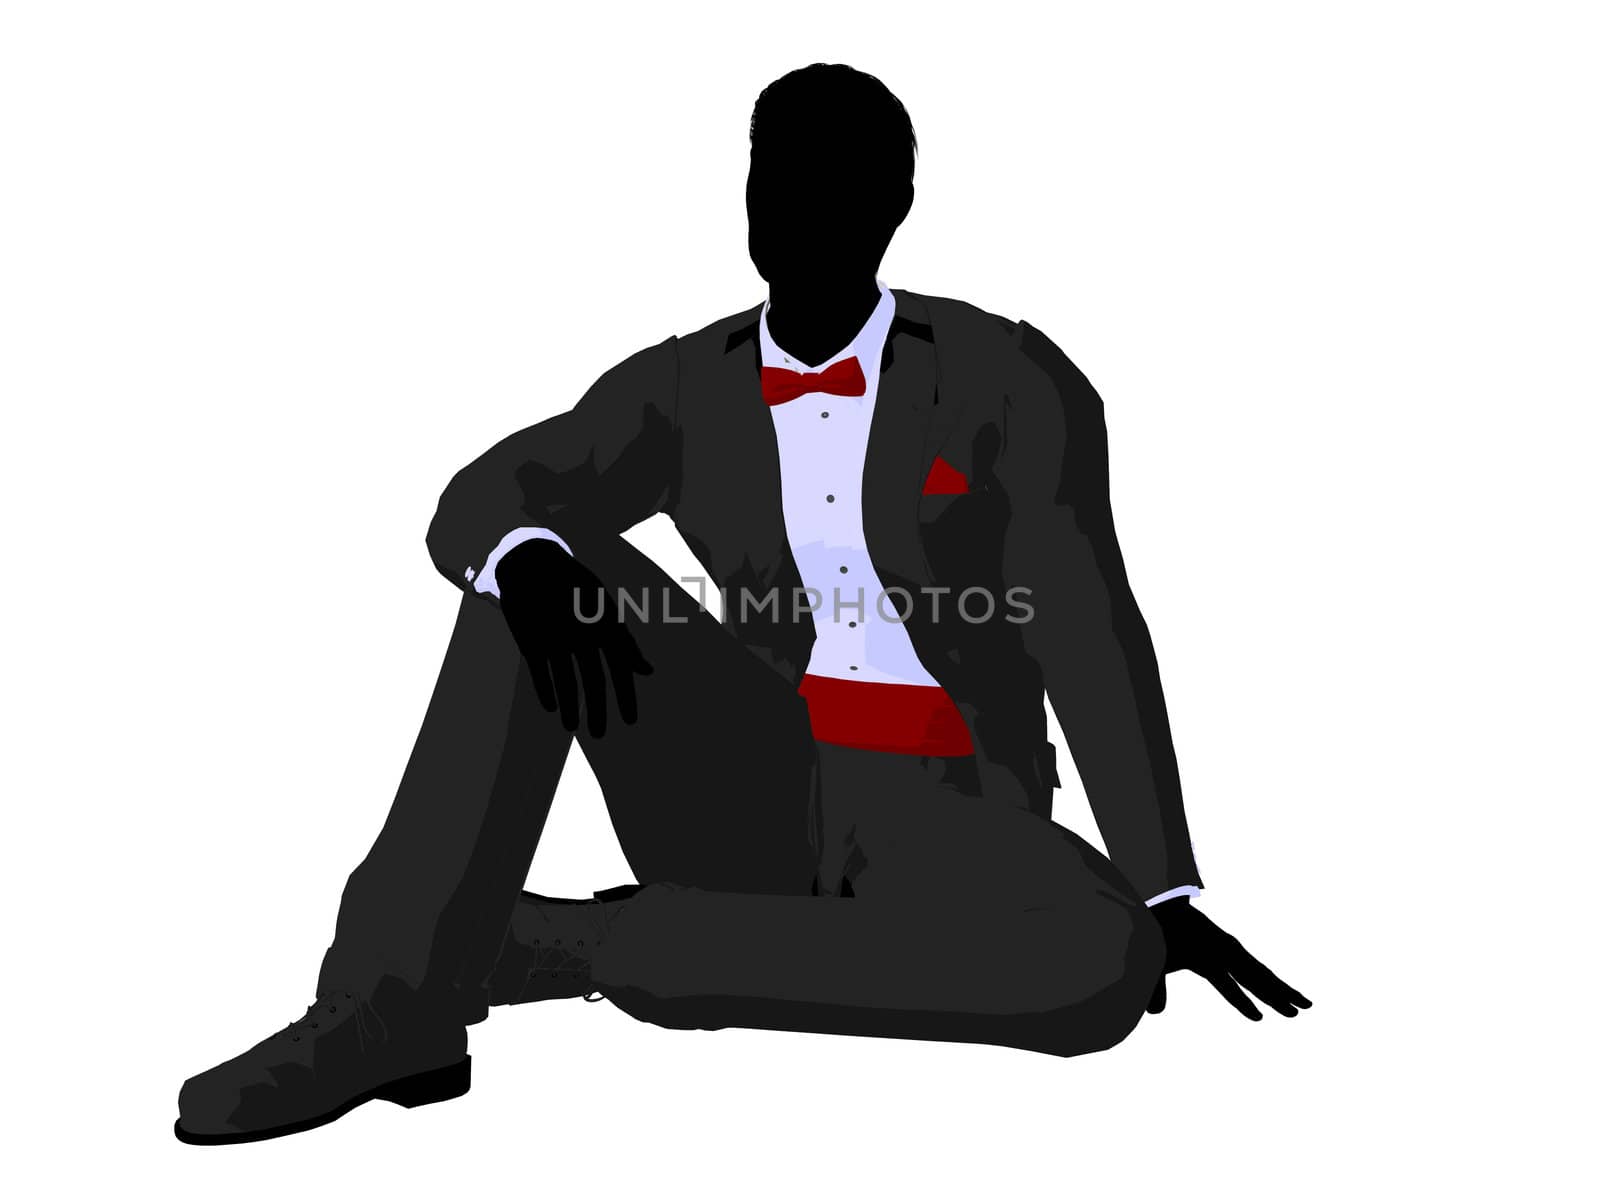 Man dressed in a tuxedo silhouette illustration on a white background